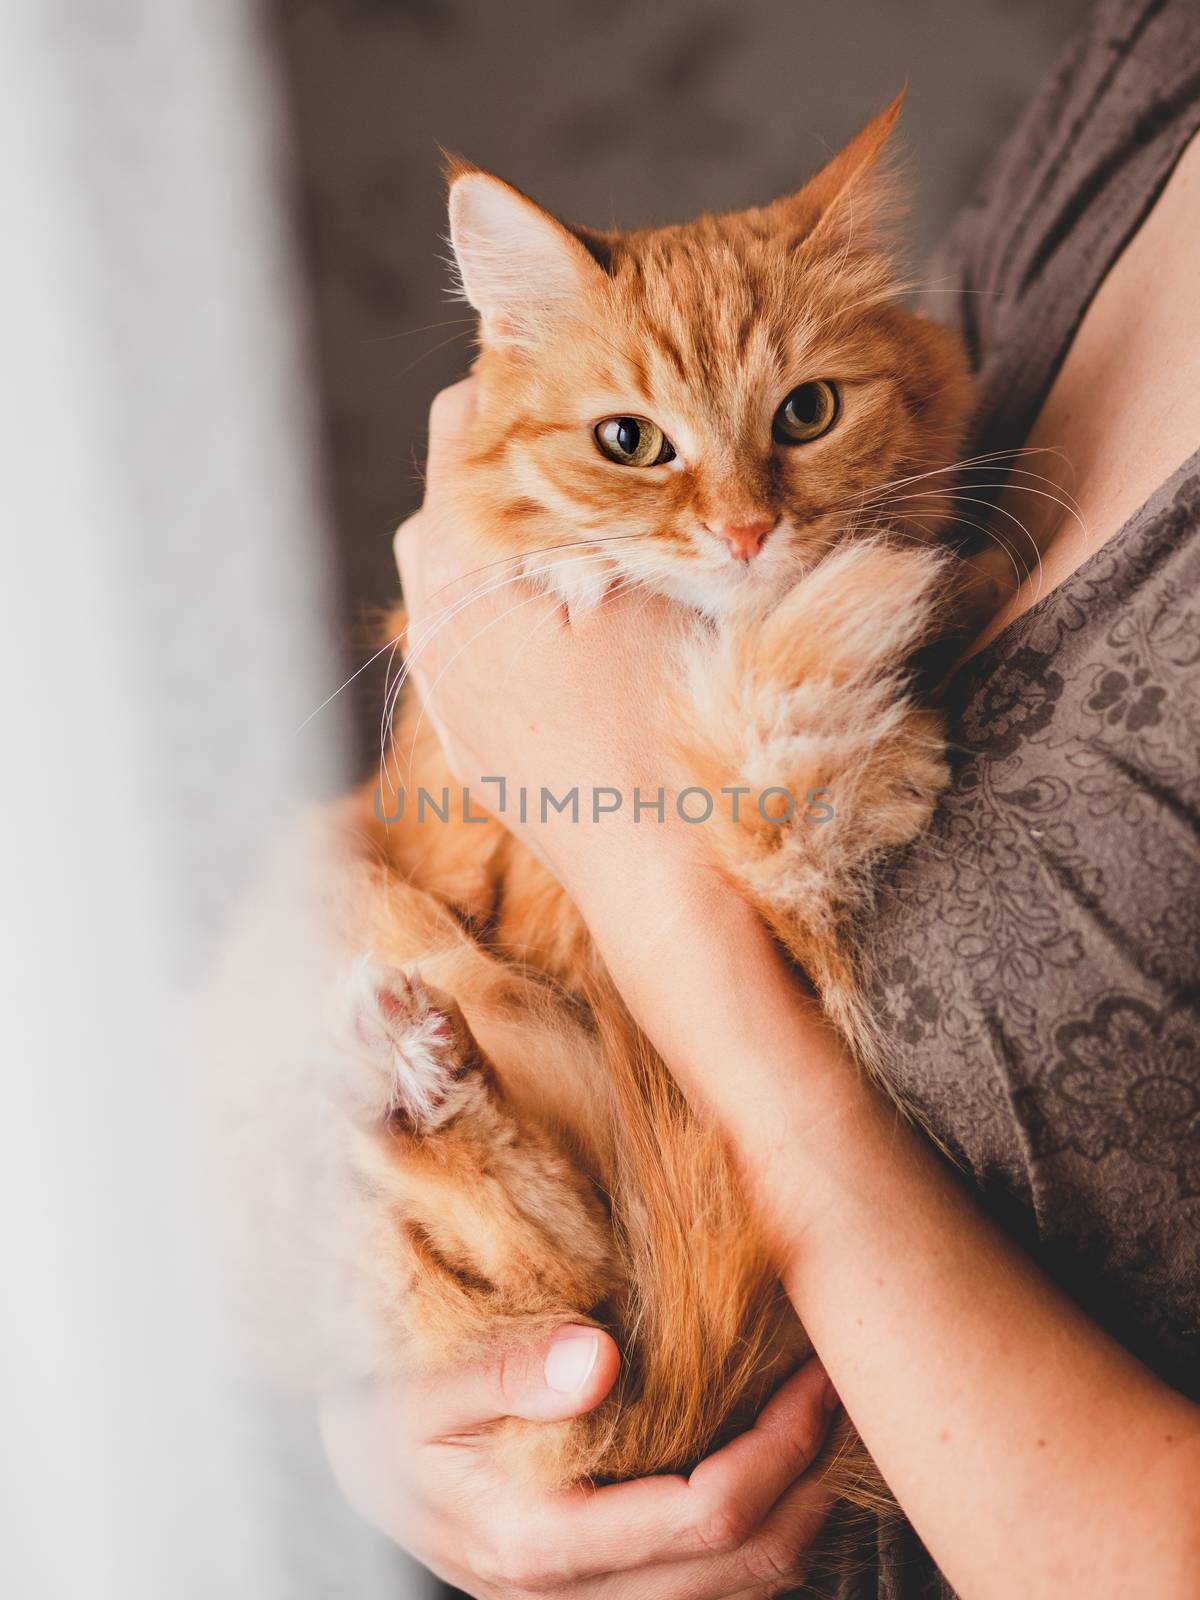 Cute ginger cat is sitting on woman's hands and staring at camera. Symbol of fluffy pet adoption.